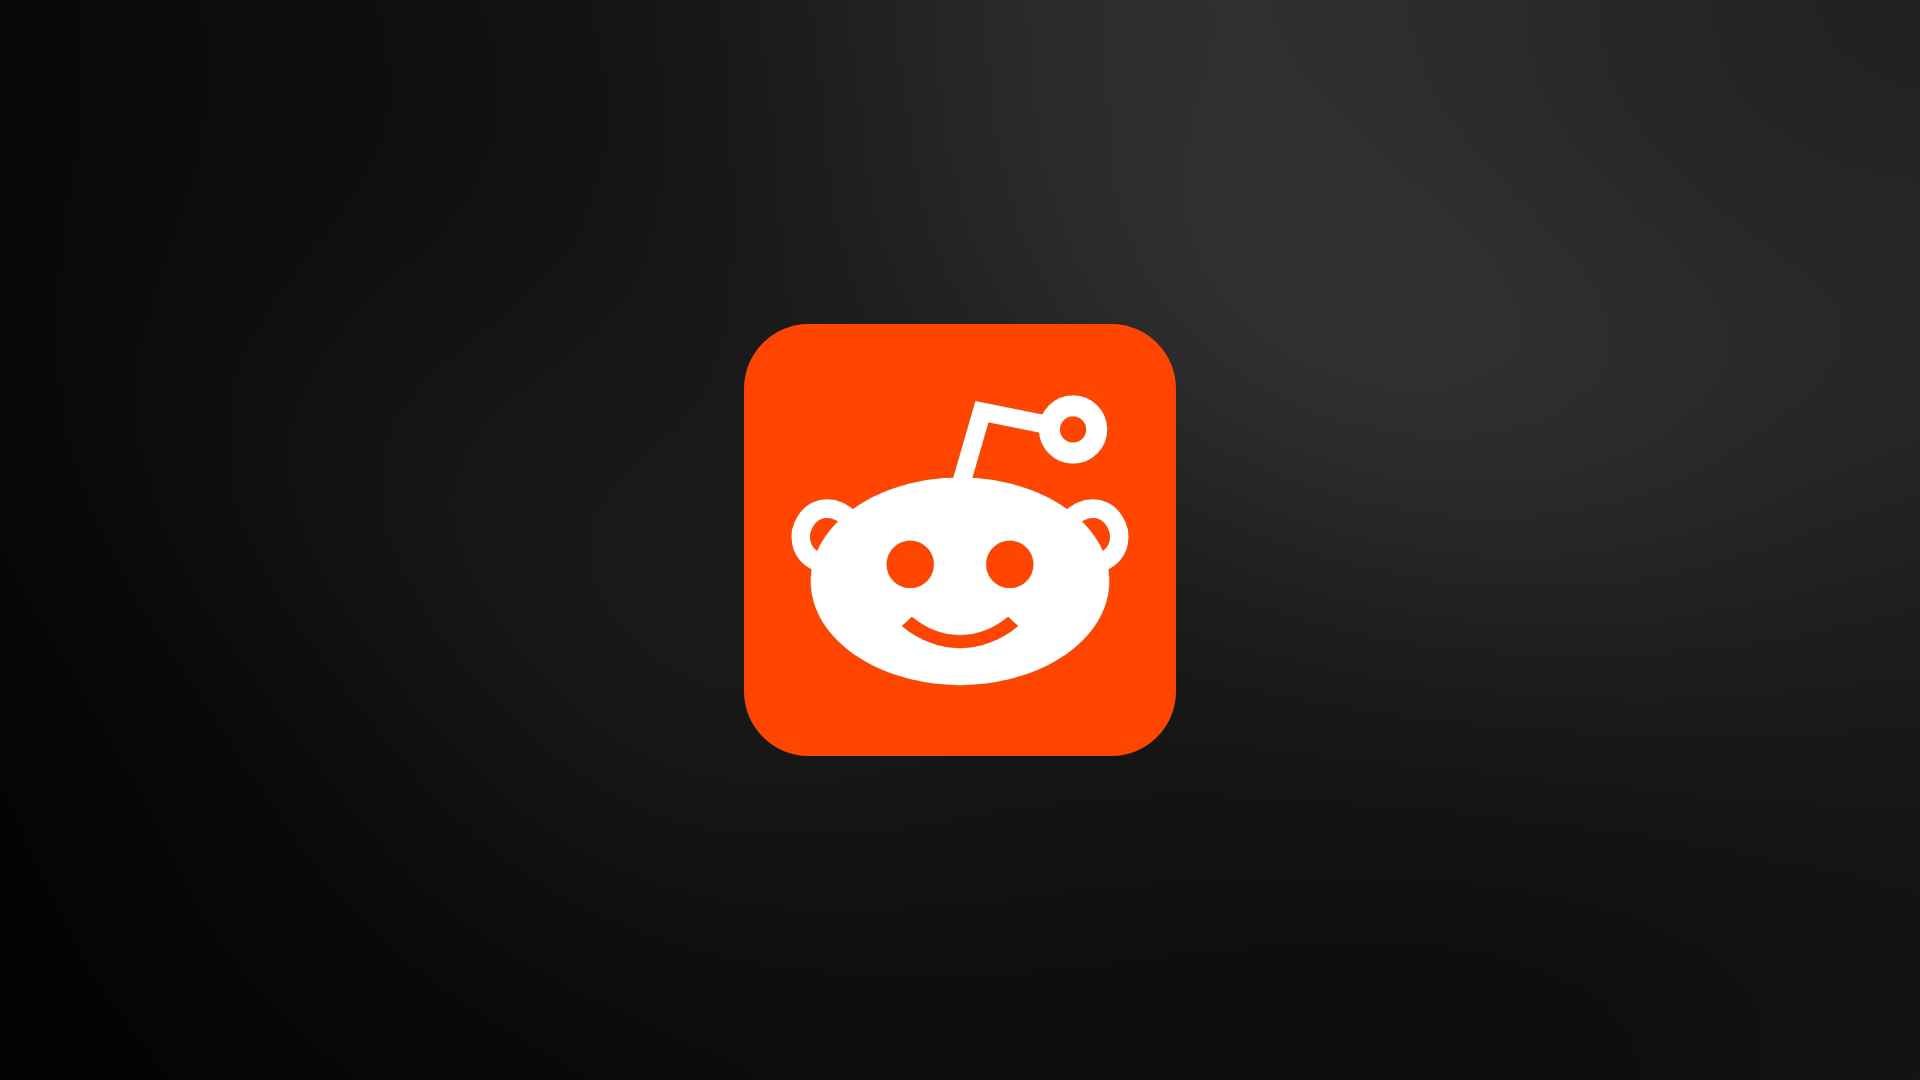 What is Reddit and how would you define it in your own words?